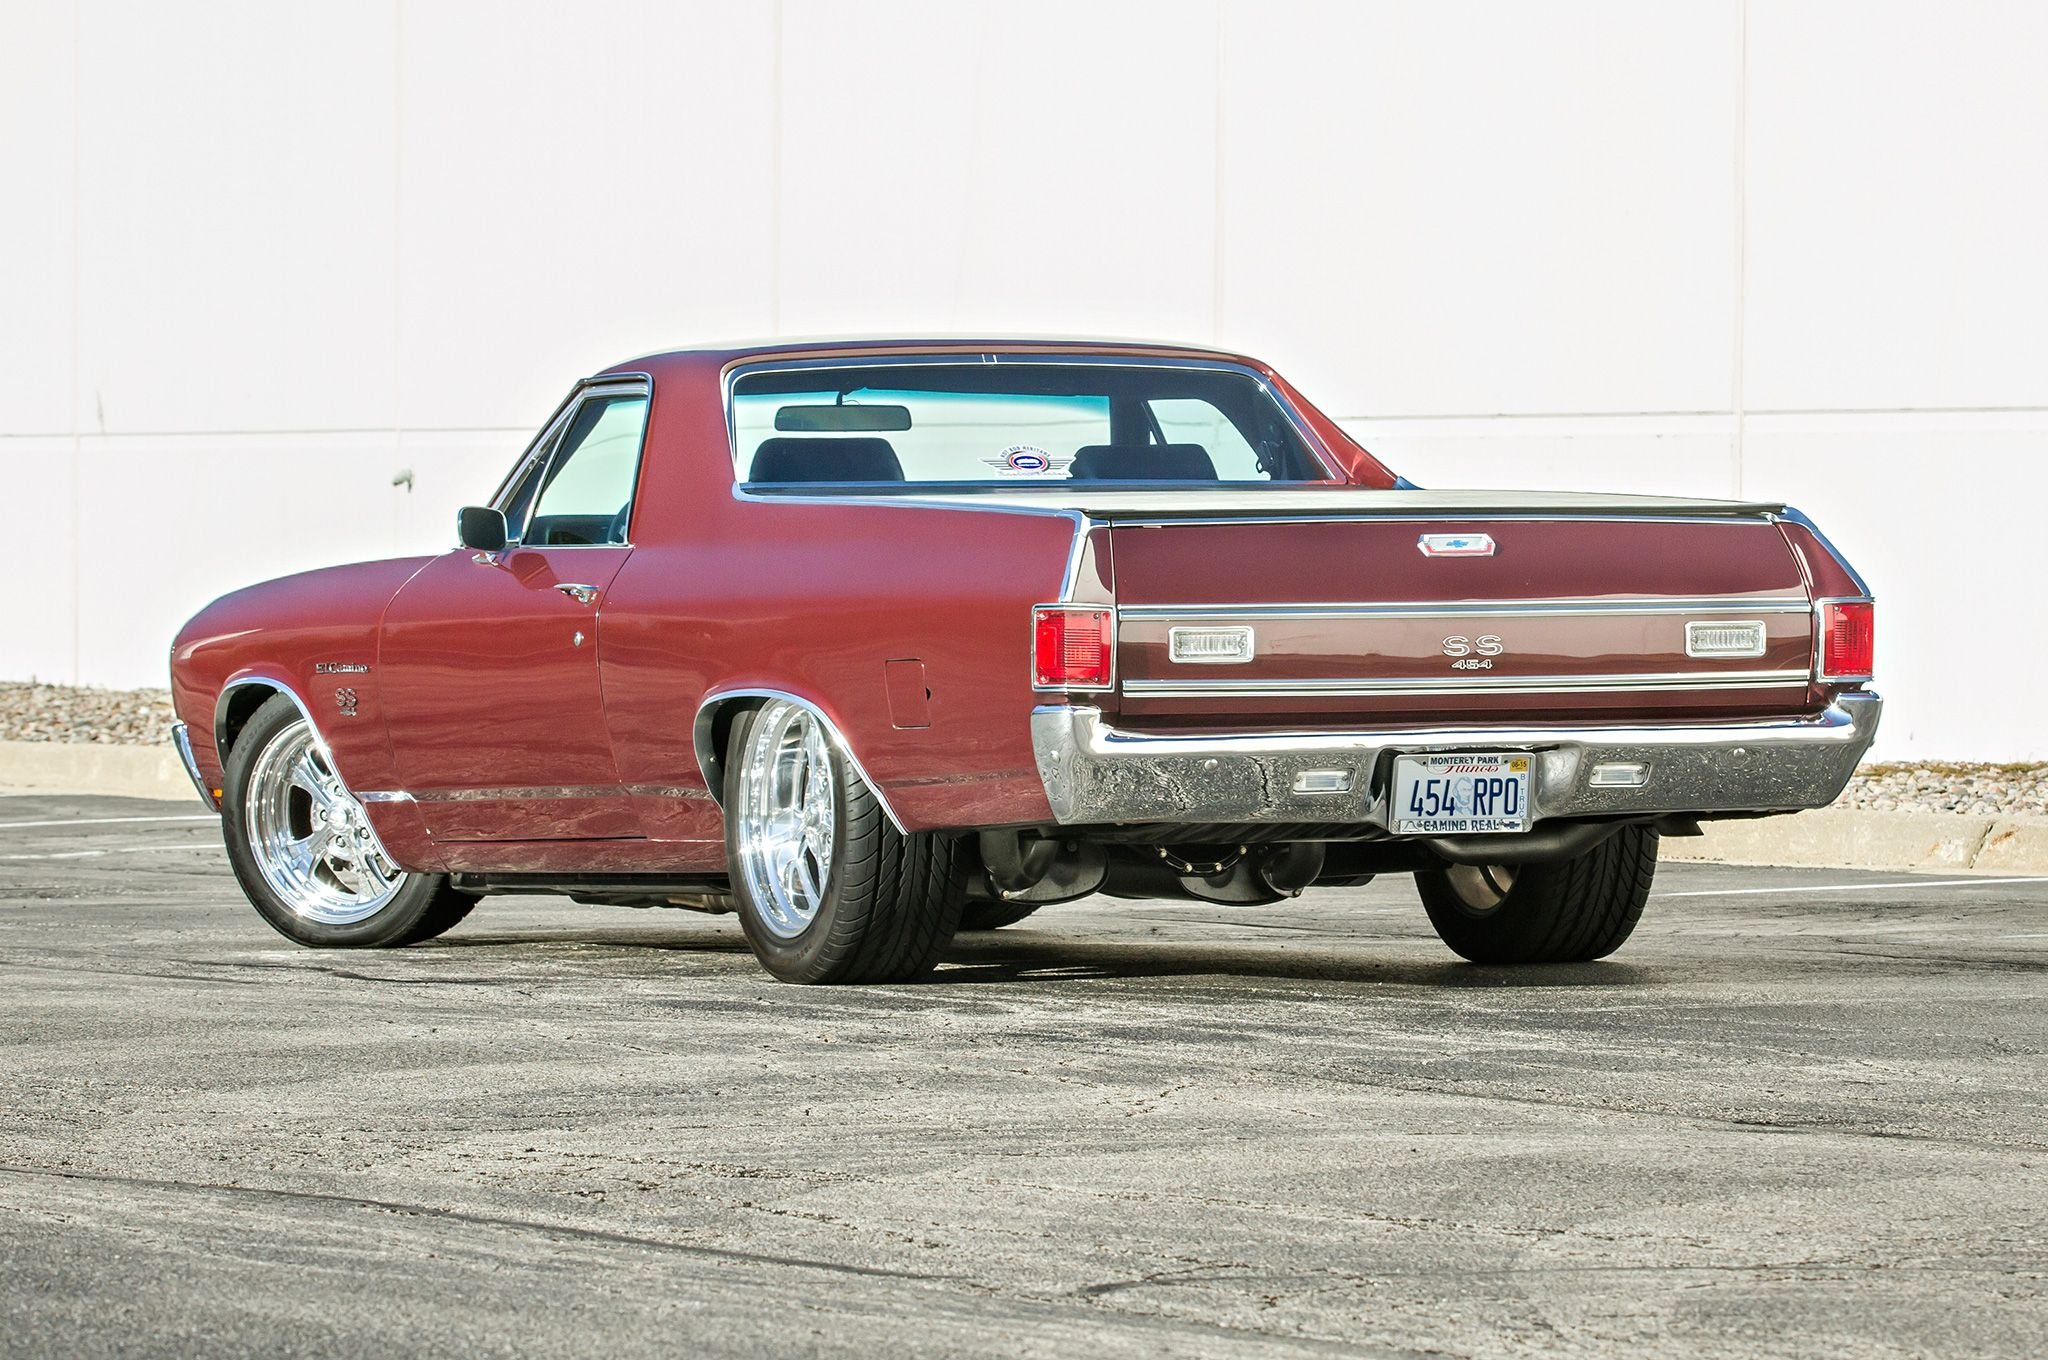 1970, 454, Ss, Chevrolet, El, Camino, Muscle, Classic, Hot, Rod, Rods, Cust...